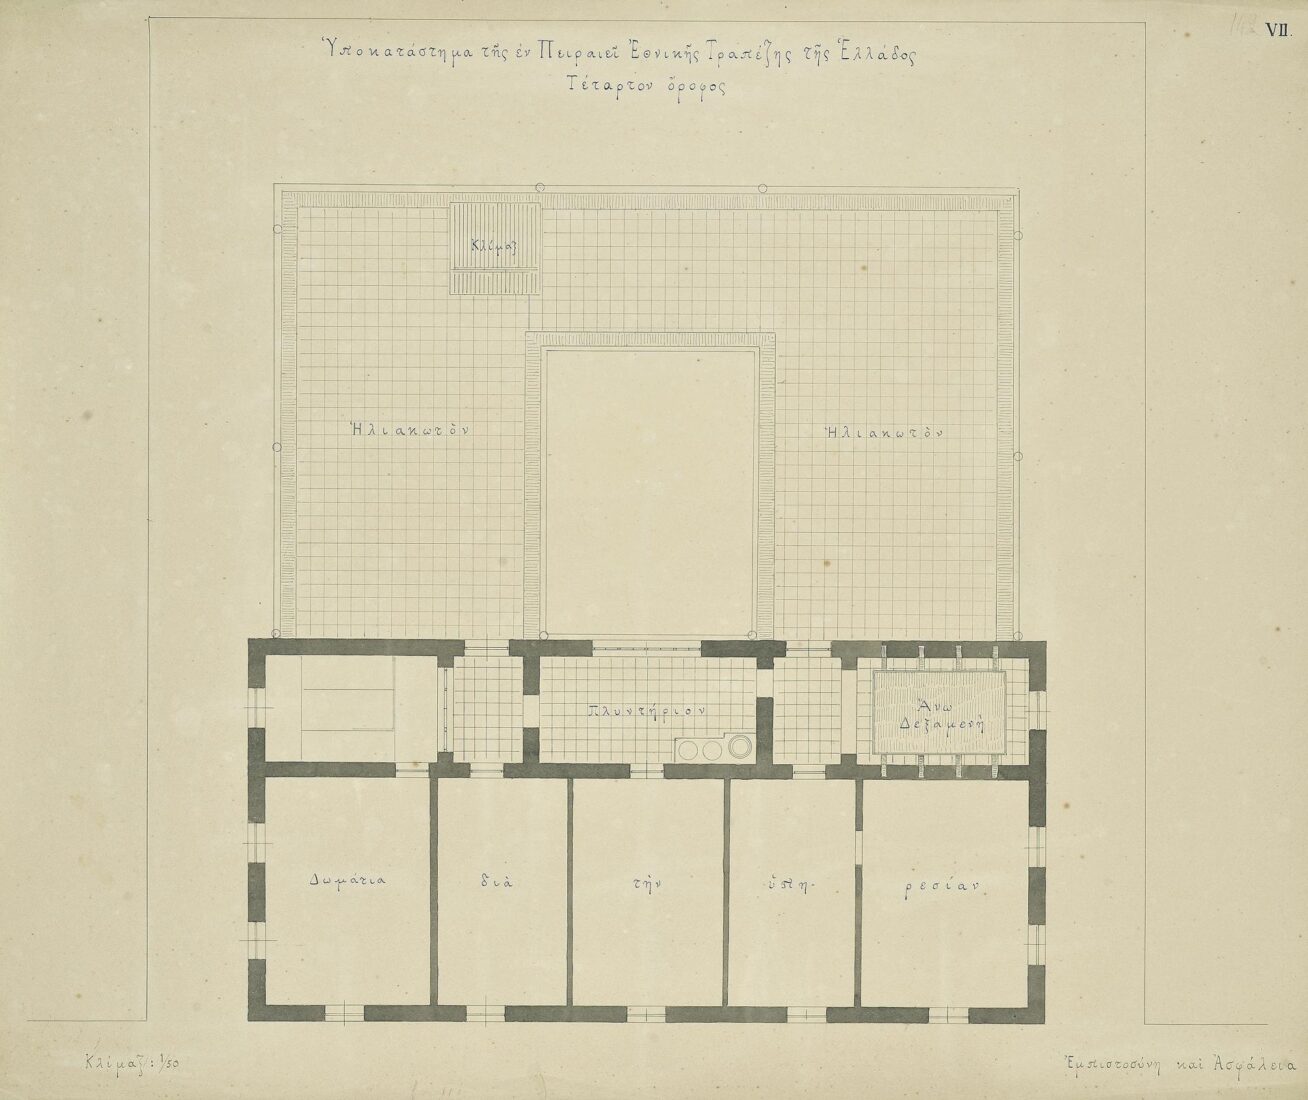 Branch of the National Bank of Greece, Piraeus, Iroon Polytehniou Street [former Athinas Street], 1911-16
Plan of the 4th Floor (Not Implemented) - Ziller Ernst